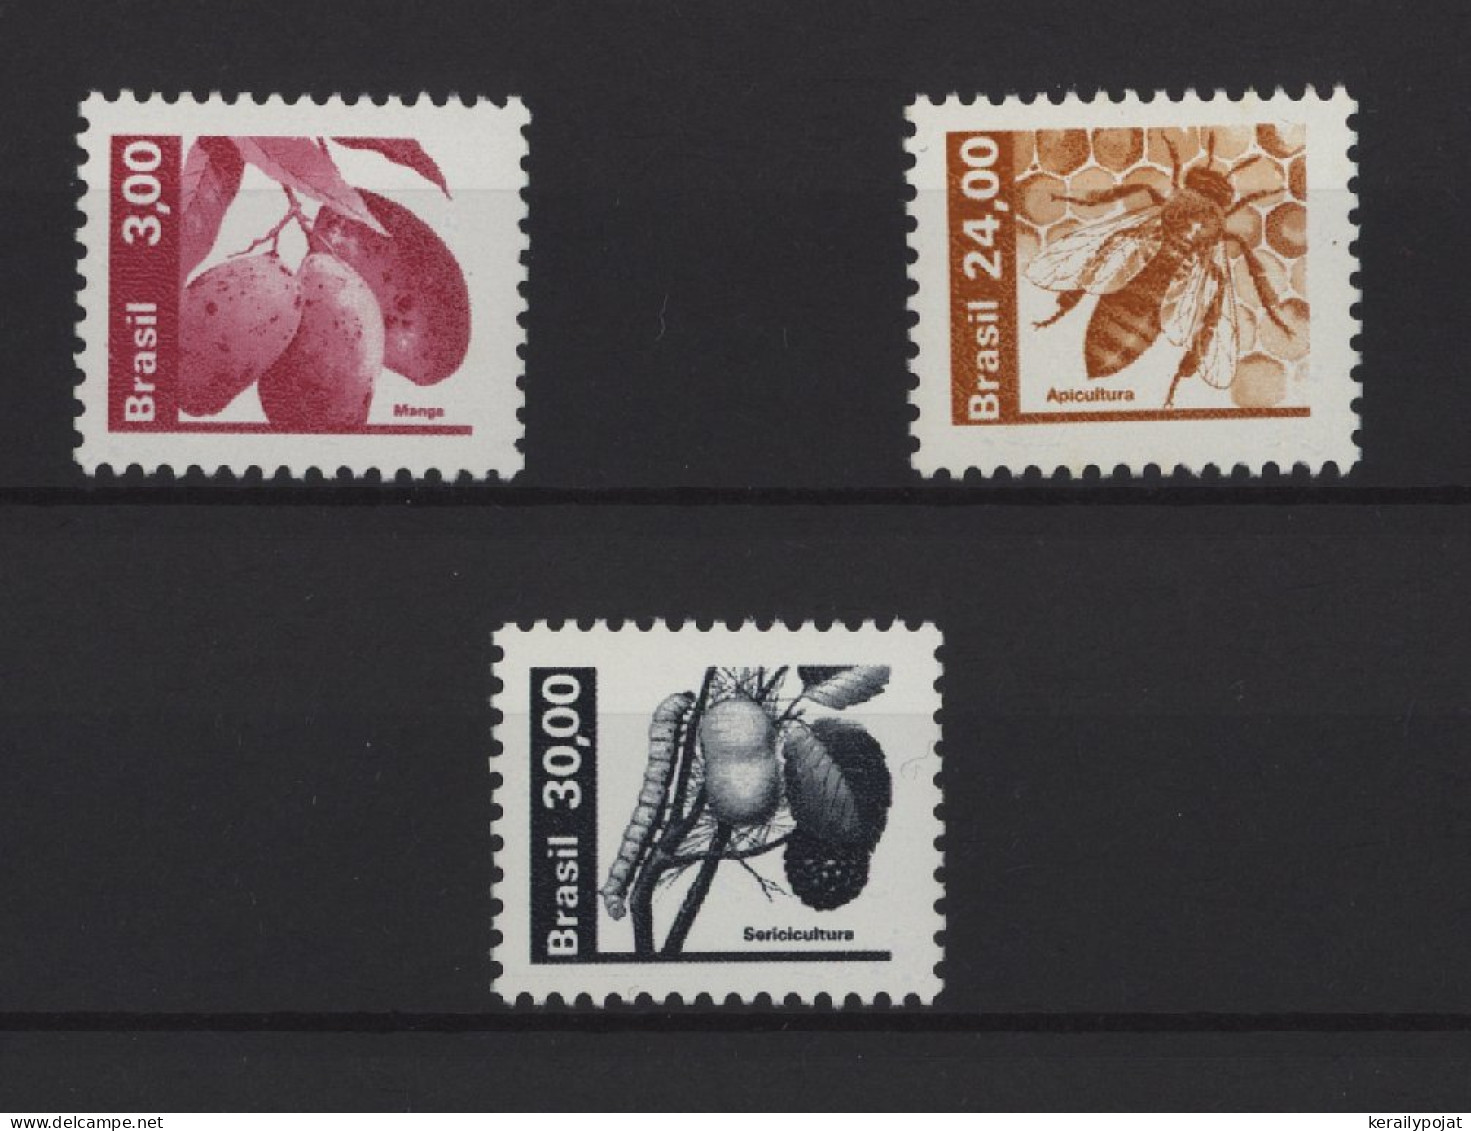 Brazil - 1982 Agricultural Products MNH__(TH-27504) - Unused Stamps